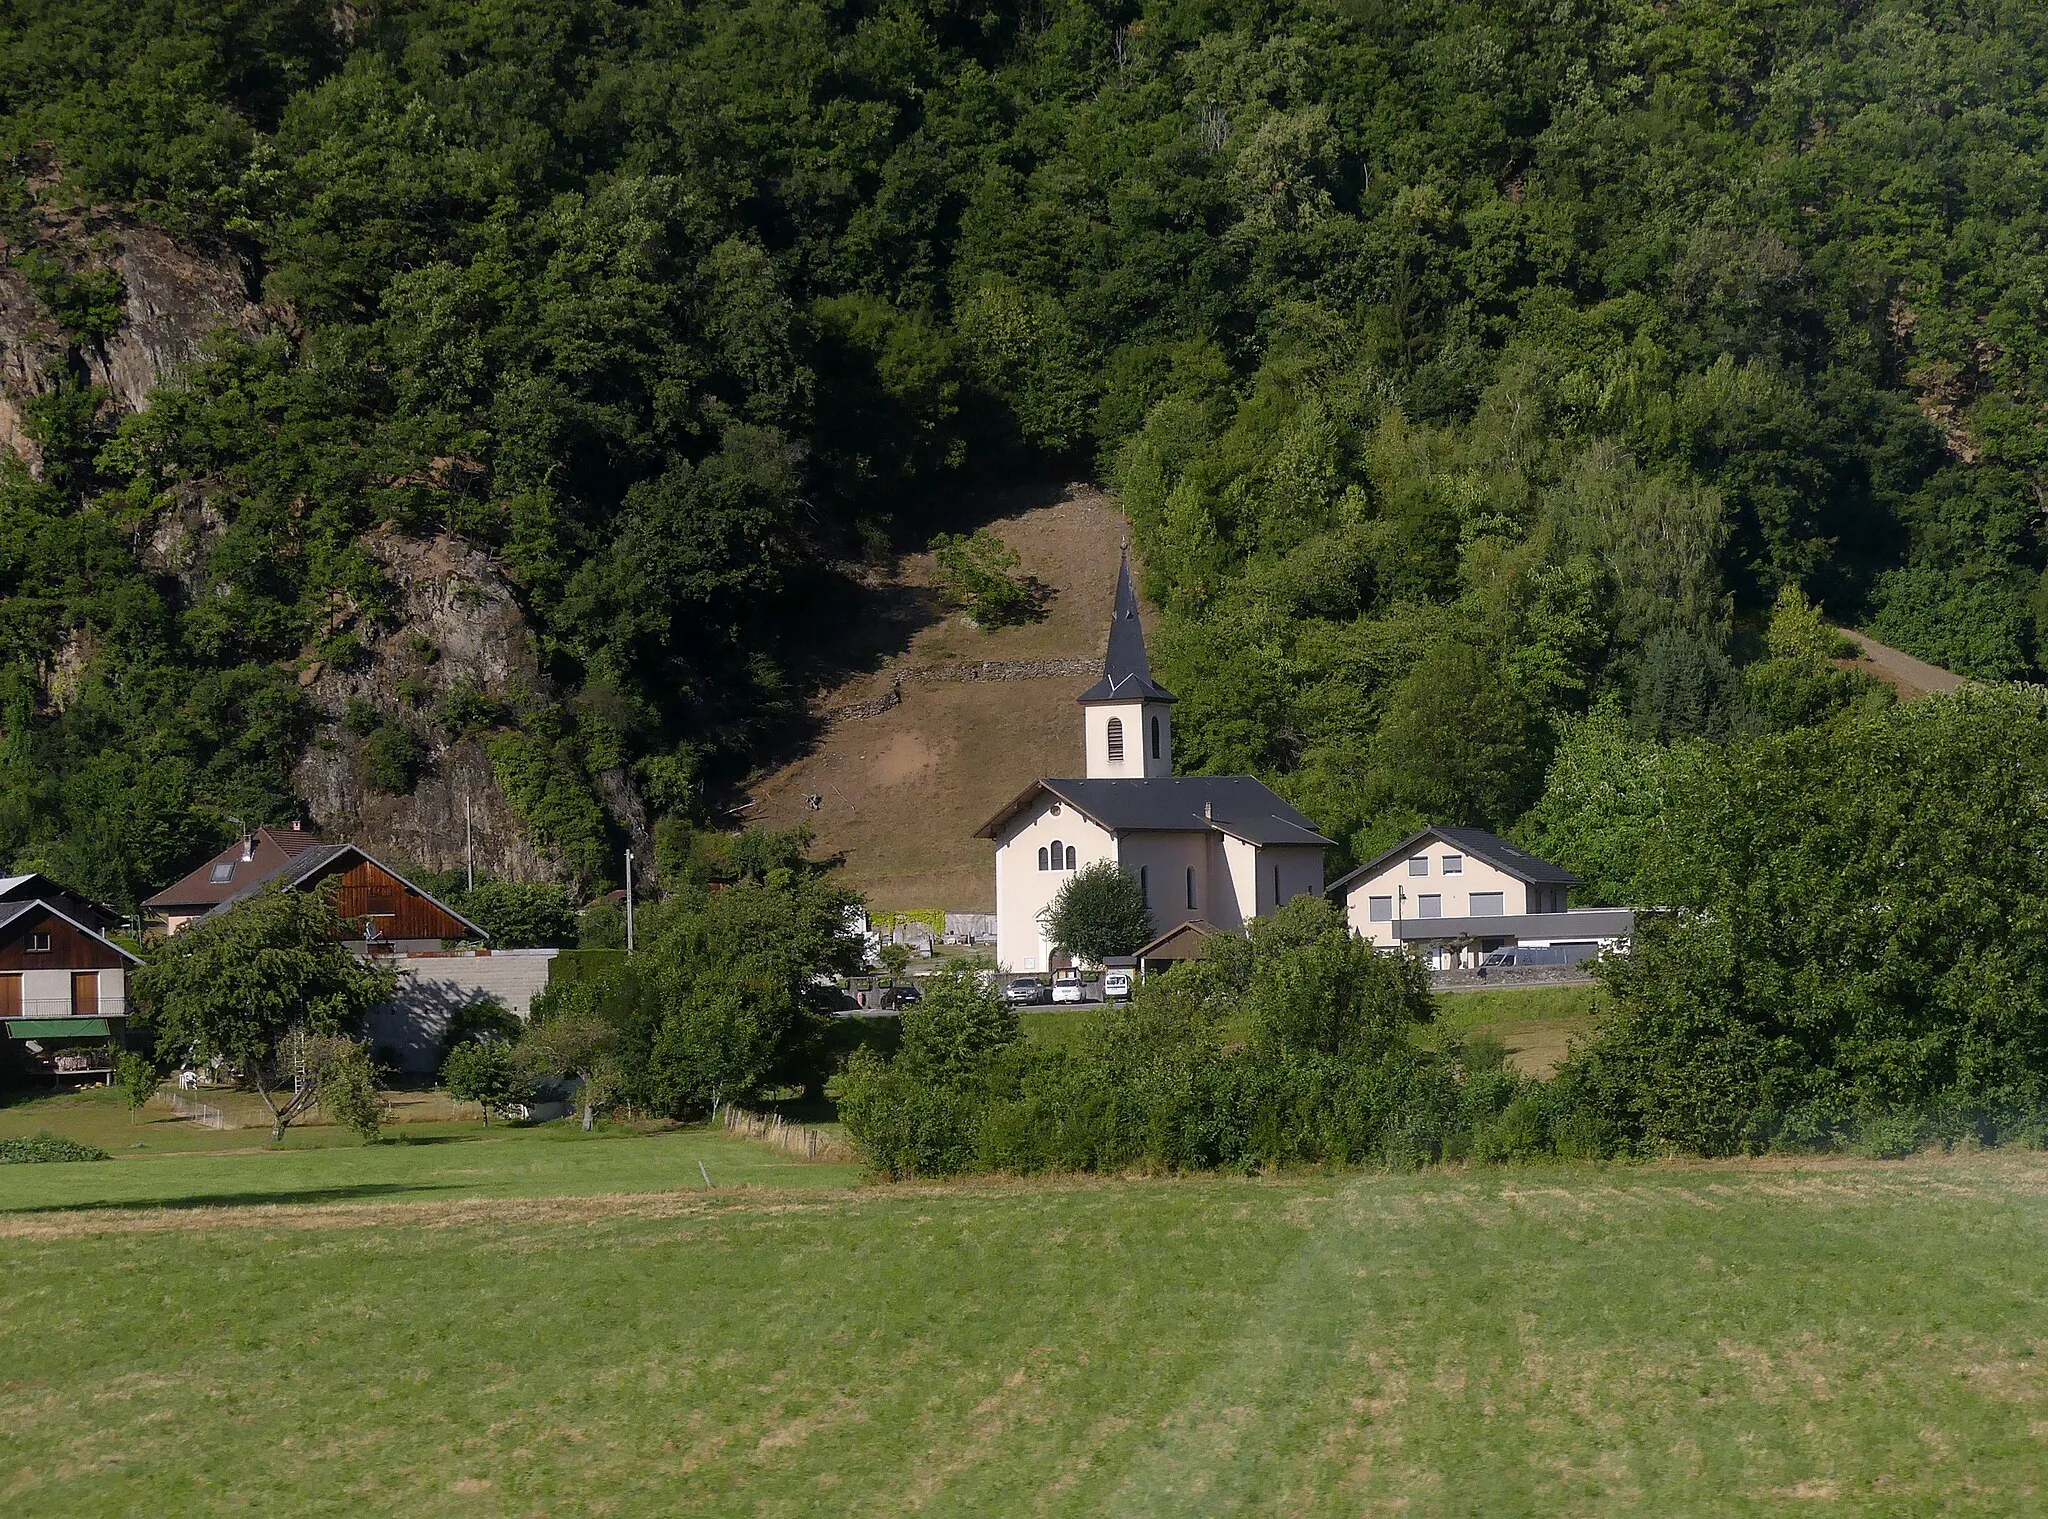 Photo showing: Sight, in the evening, of Tours-en-Savoie church in Tarentaise valley, Savoie, France.